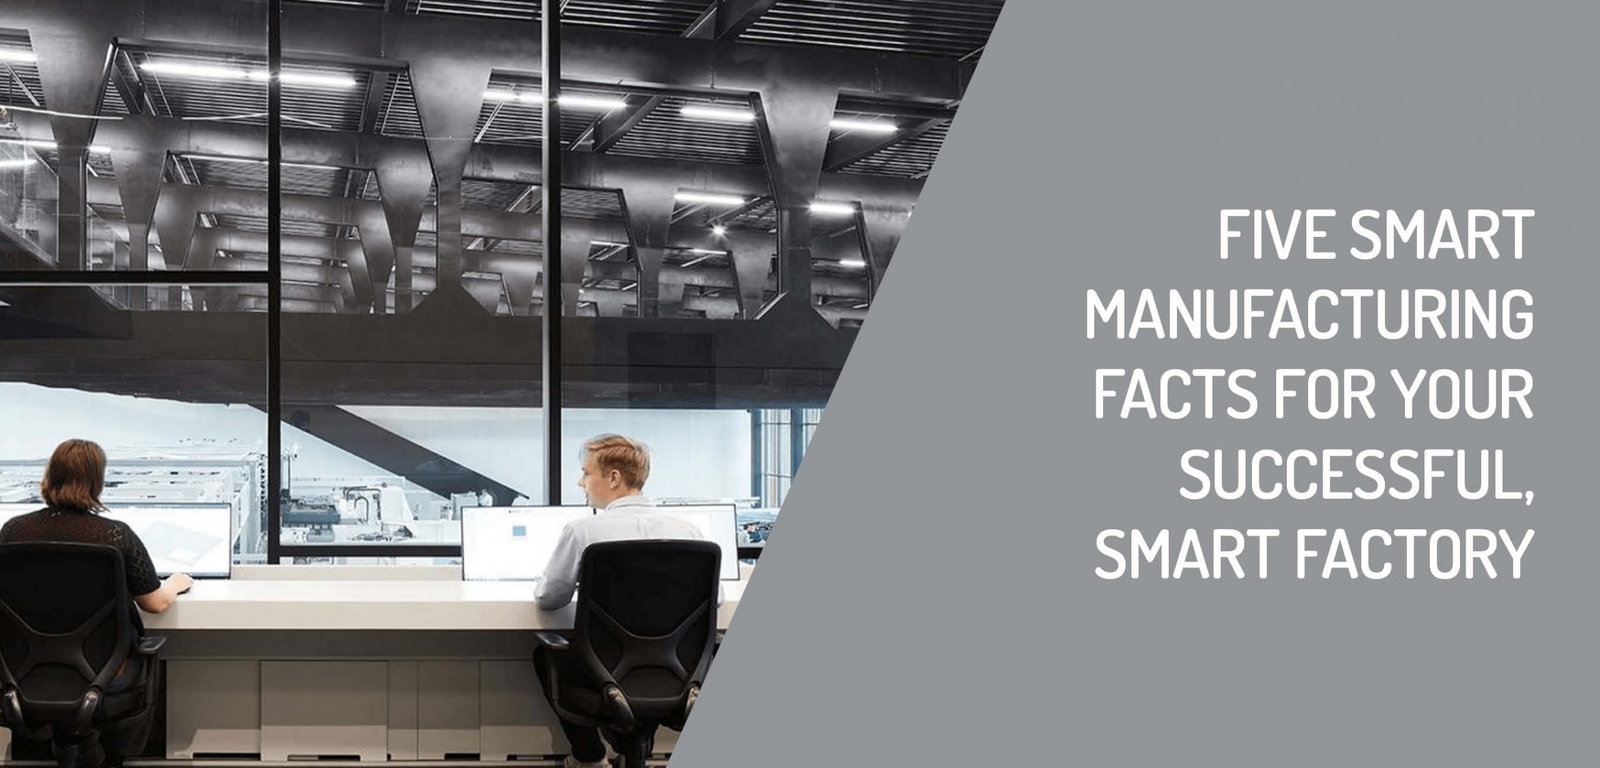 Five Smart Manufacturing Facts: For Your Successful, Smart Factory